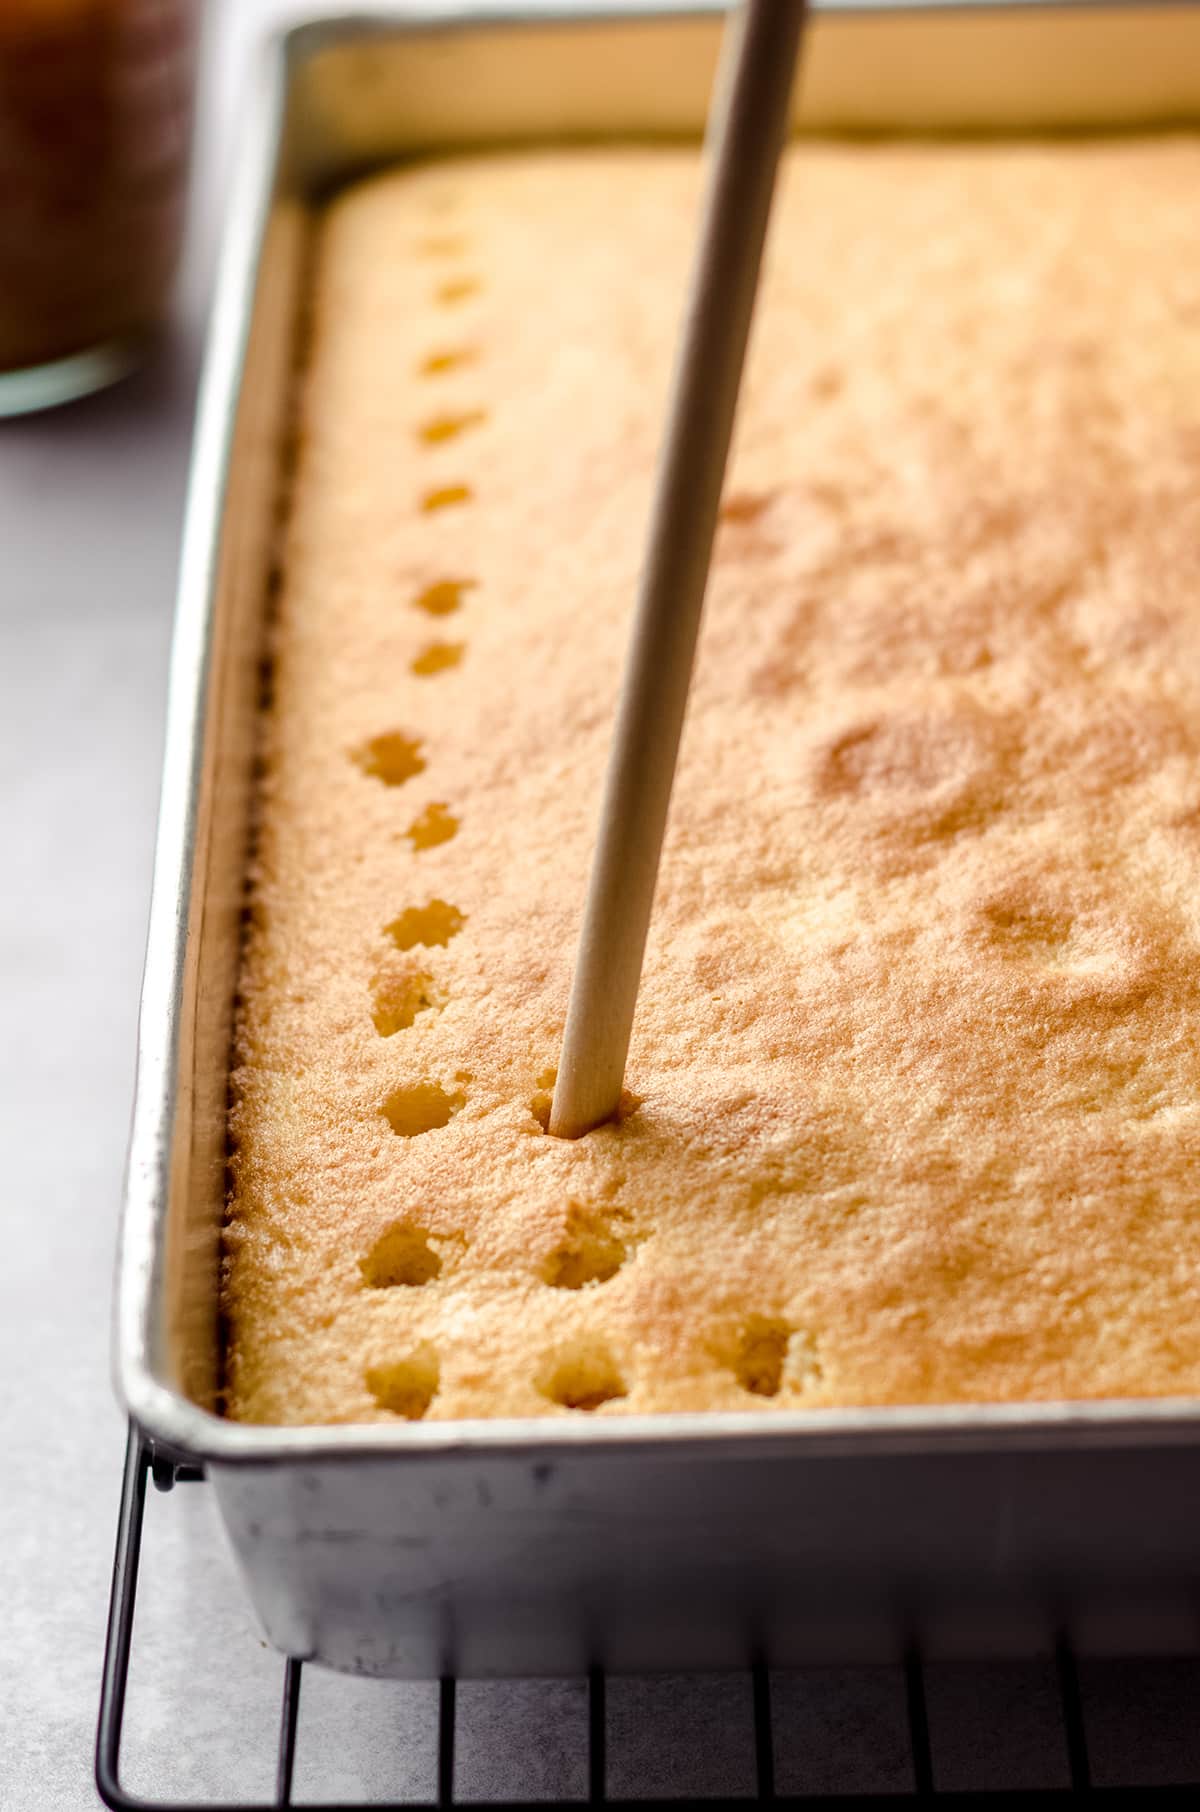 Poking holes in a cake that has been baked.